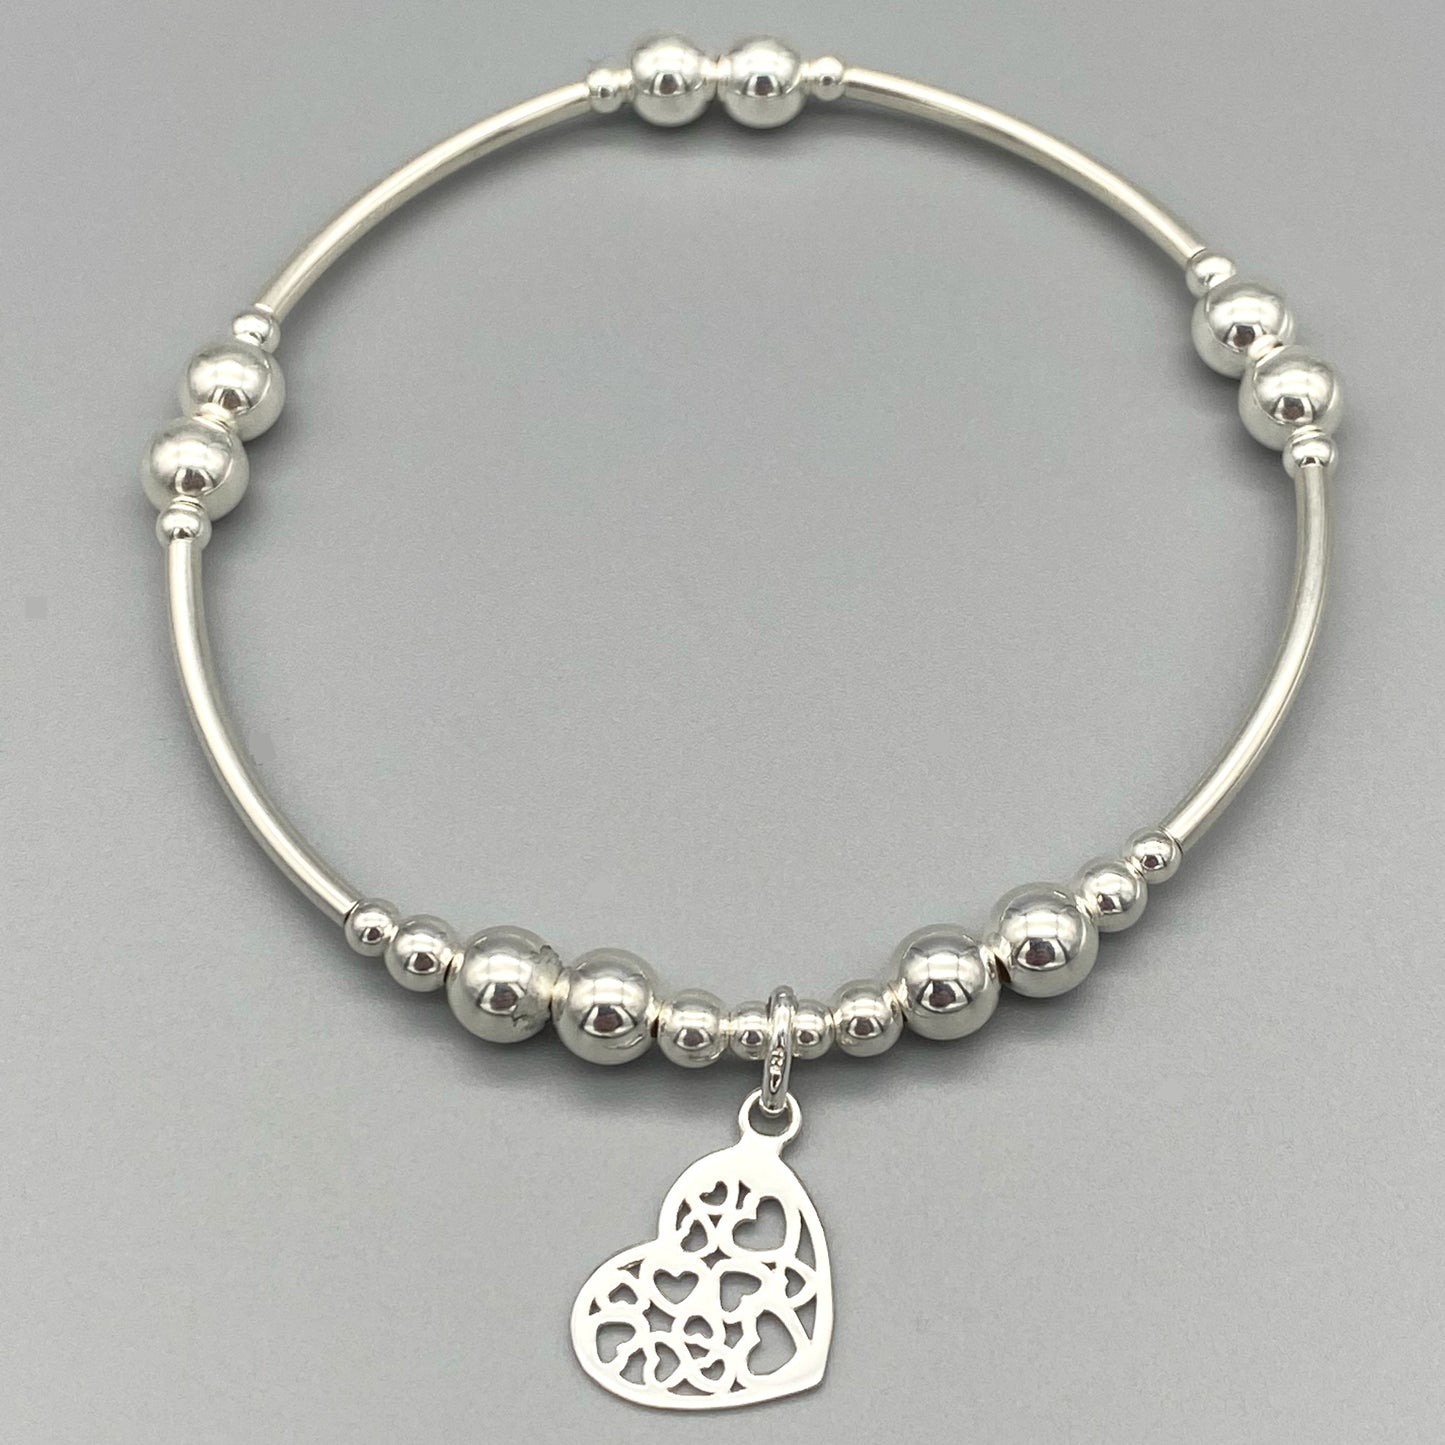 Heart charm filigree sterling silver hand-made women's stacking bracelet by My Silver Wish